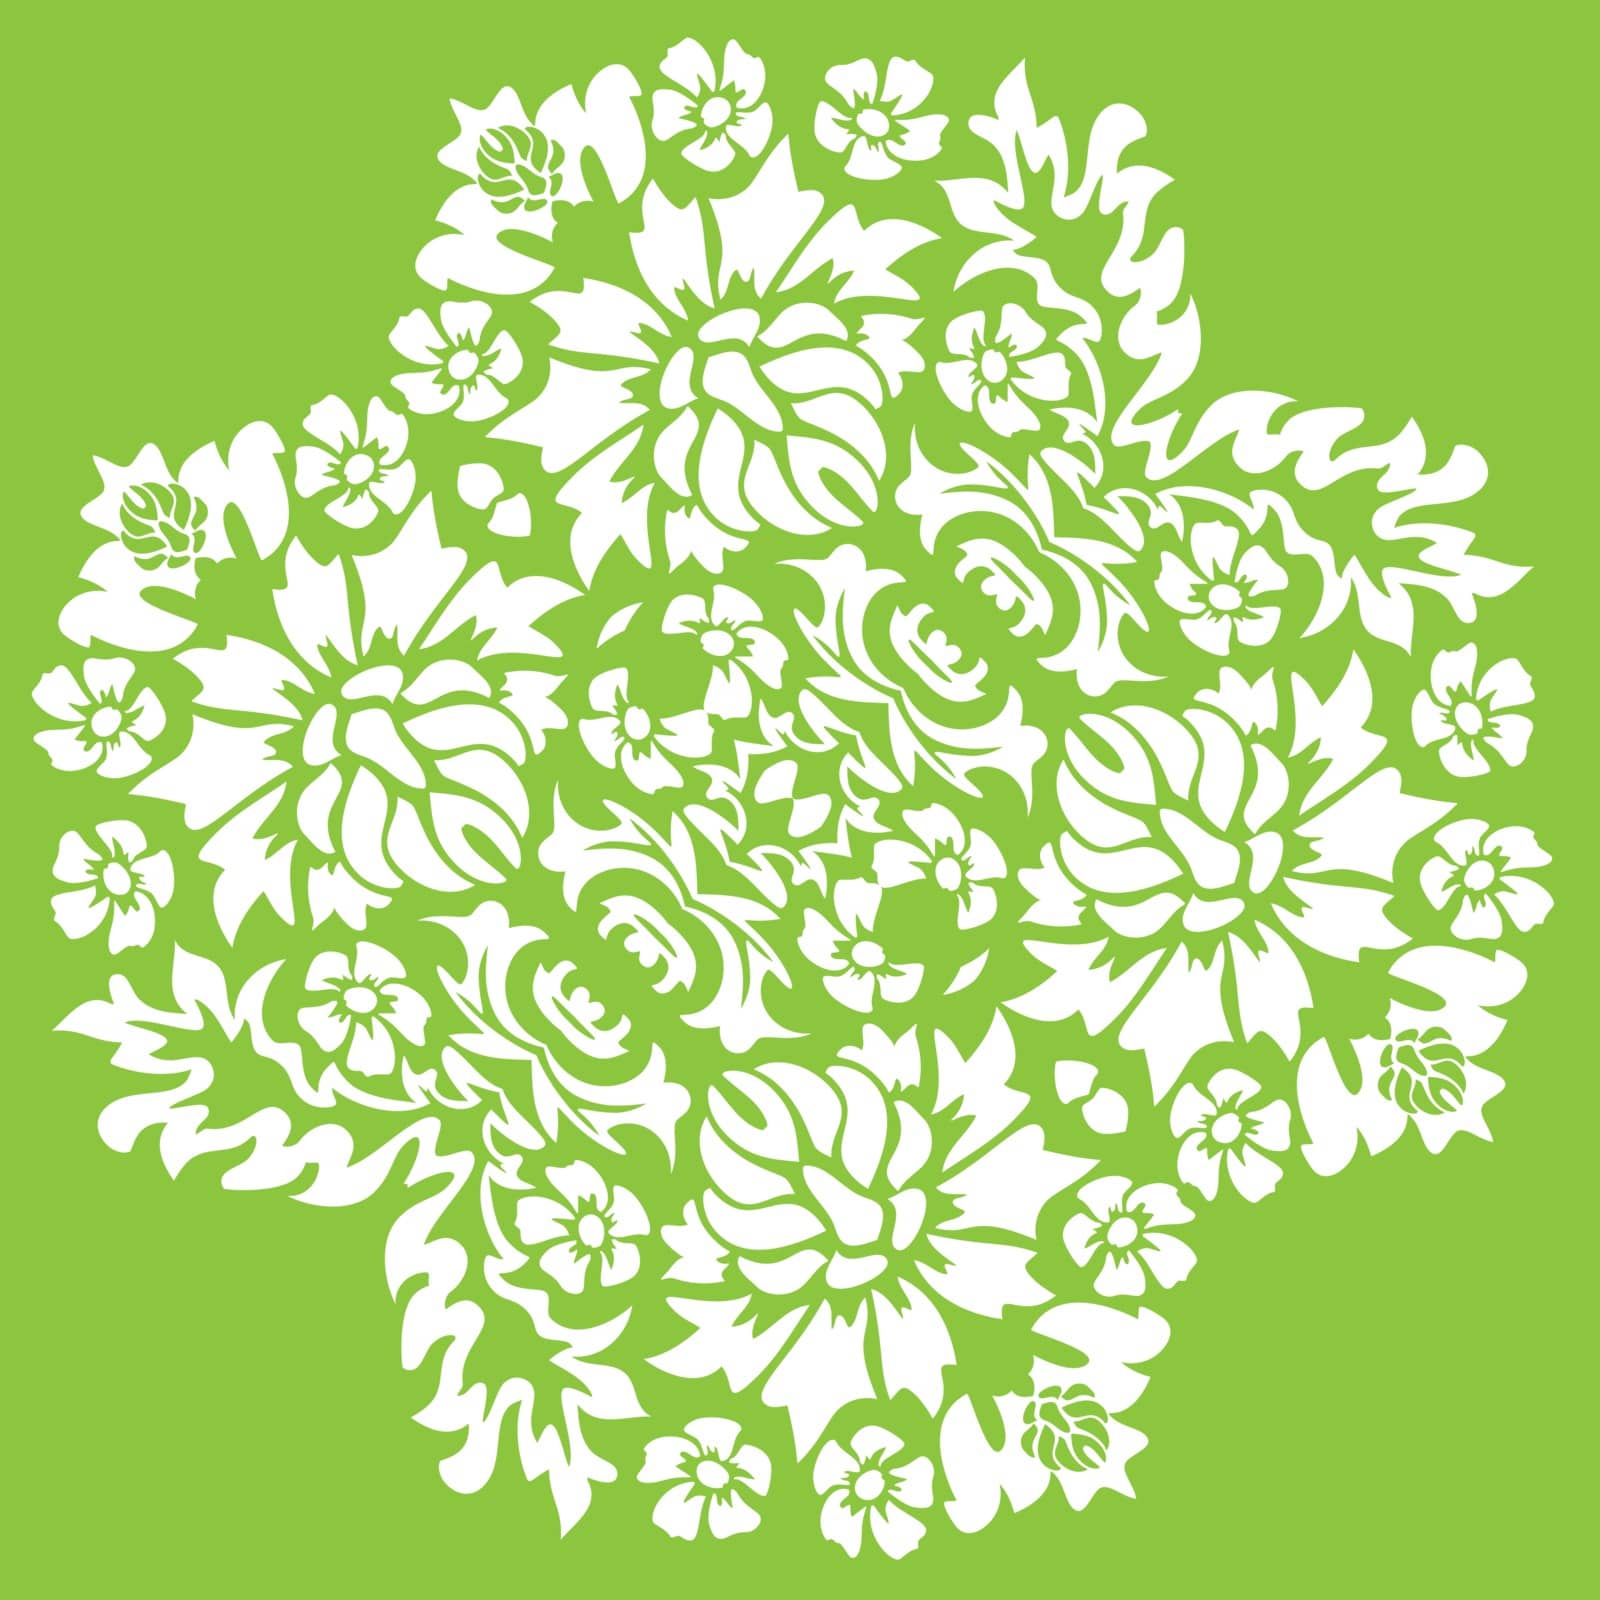 Damask seamless floral pattern. Royal wallpaper. Flowers, leaves on a green background. EPS 10